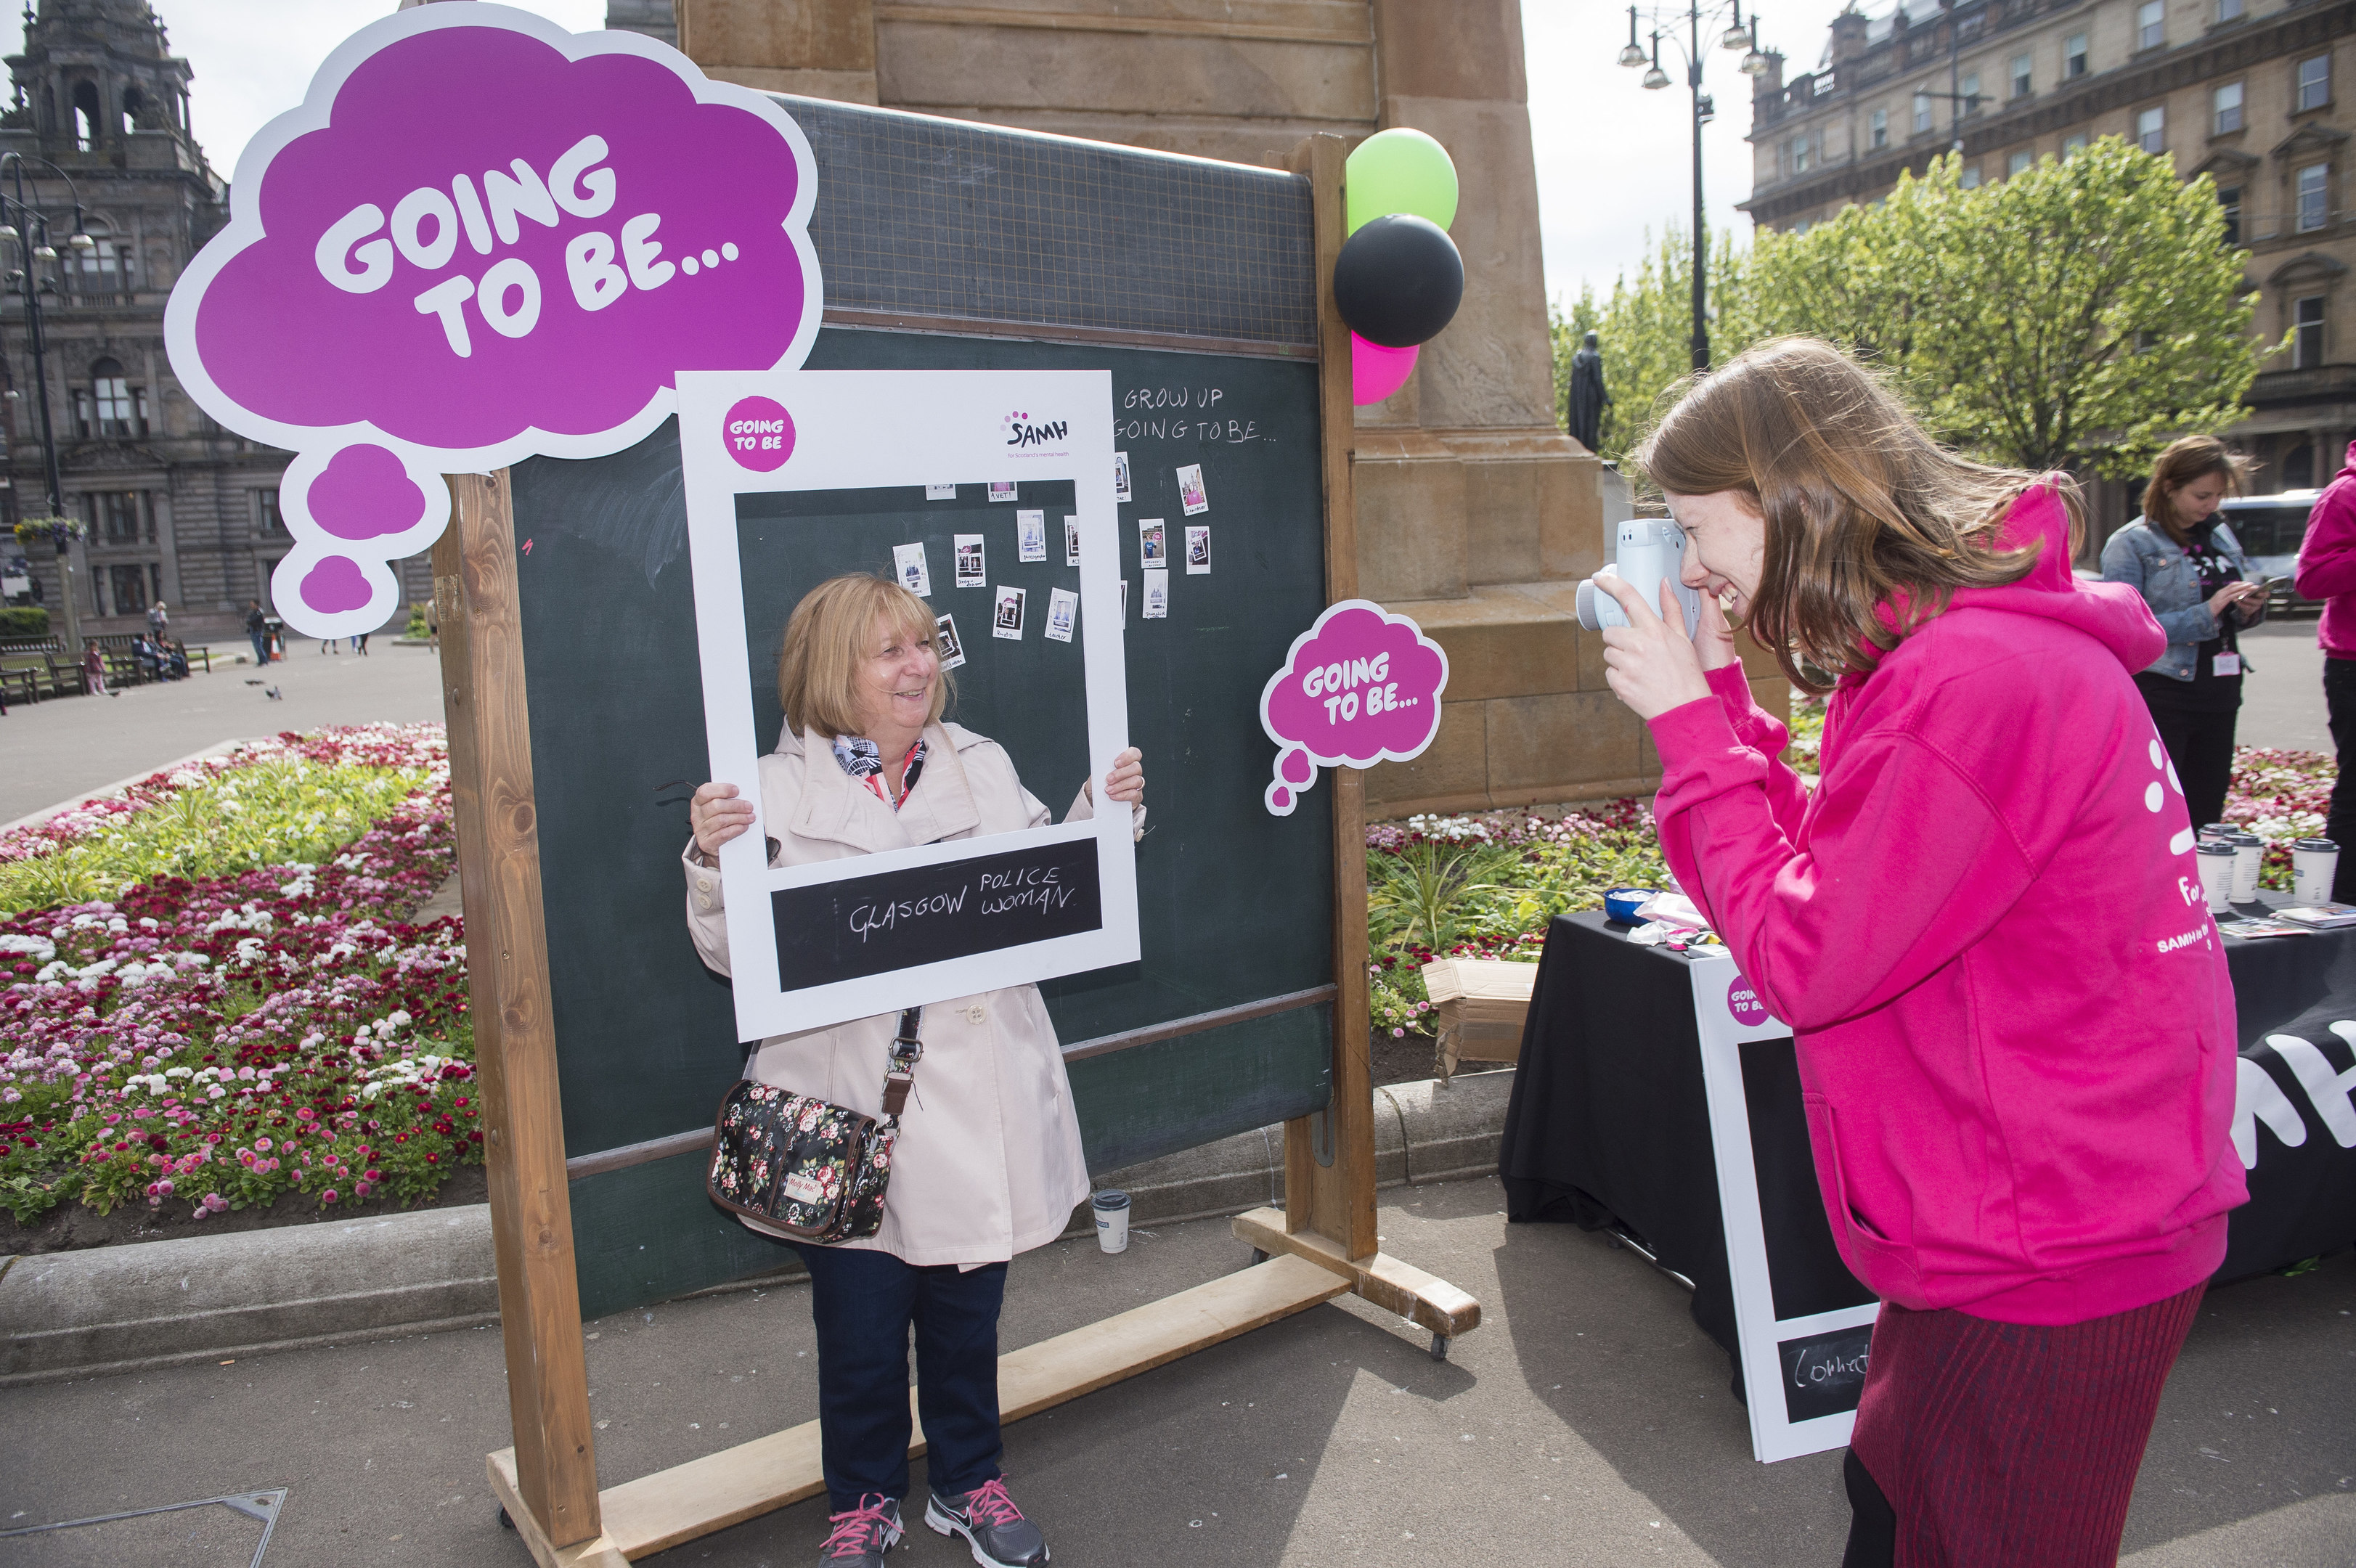 The Scottish Association for Mental Health launch their 'Going to Be' campaign in Glasgow's George Square (Lenny Warren / Warren Media)